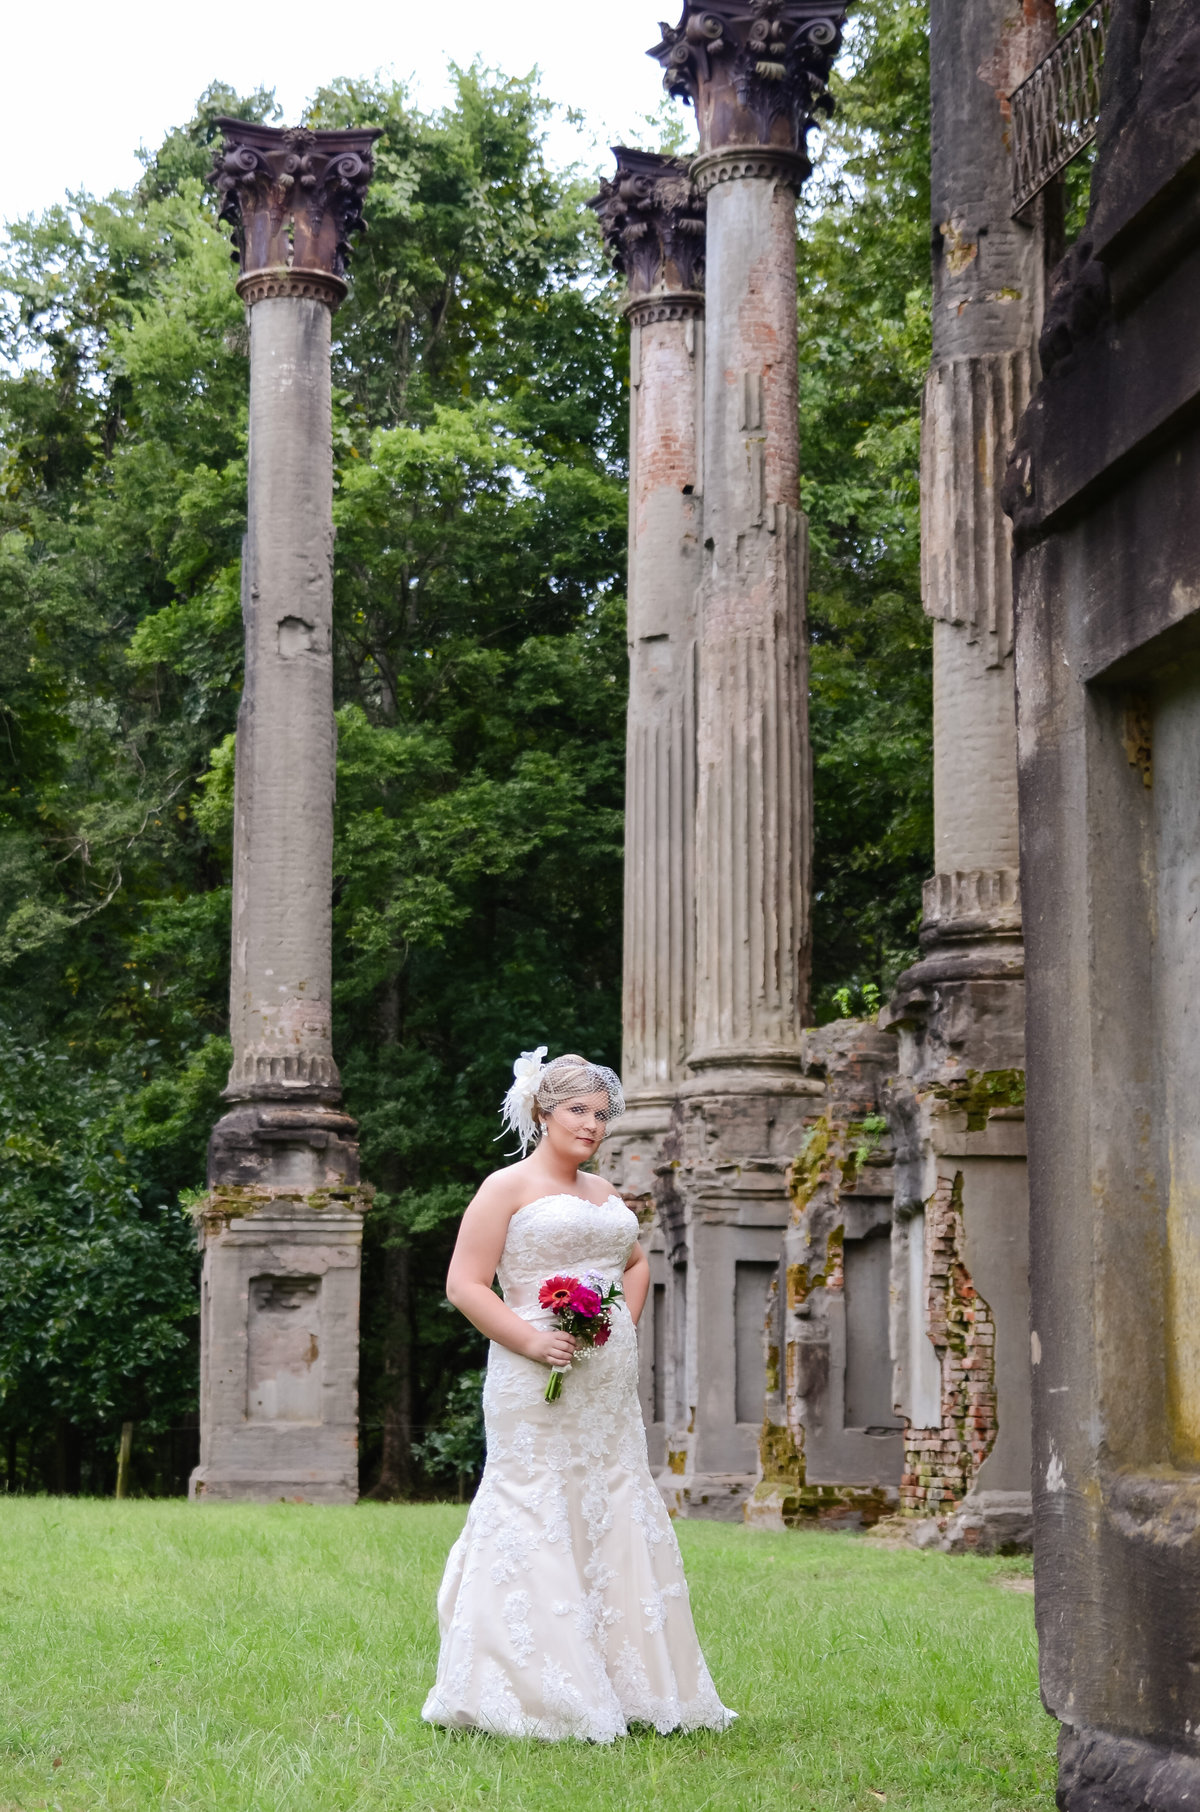 Beautiful bridal portrait photography: Bride with bouquet among the ruins of Windsor plantation in Port Gibson Mississippi